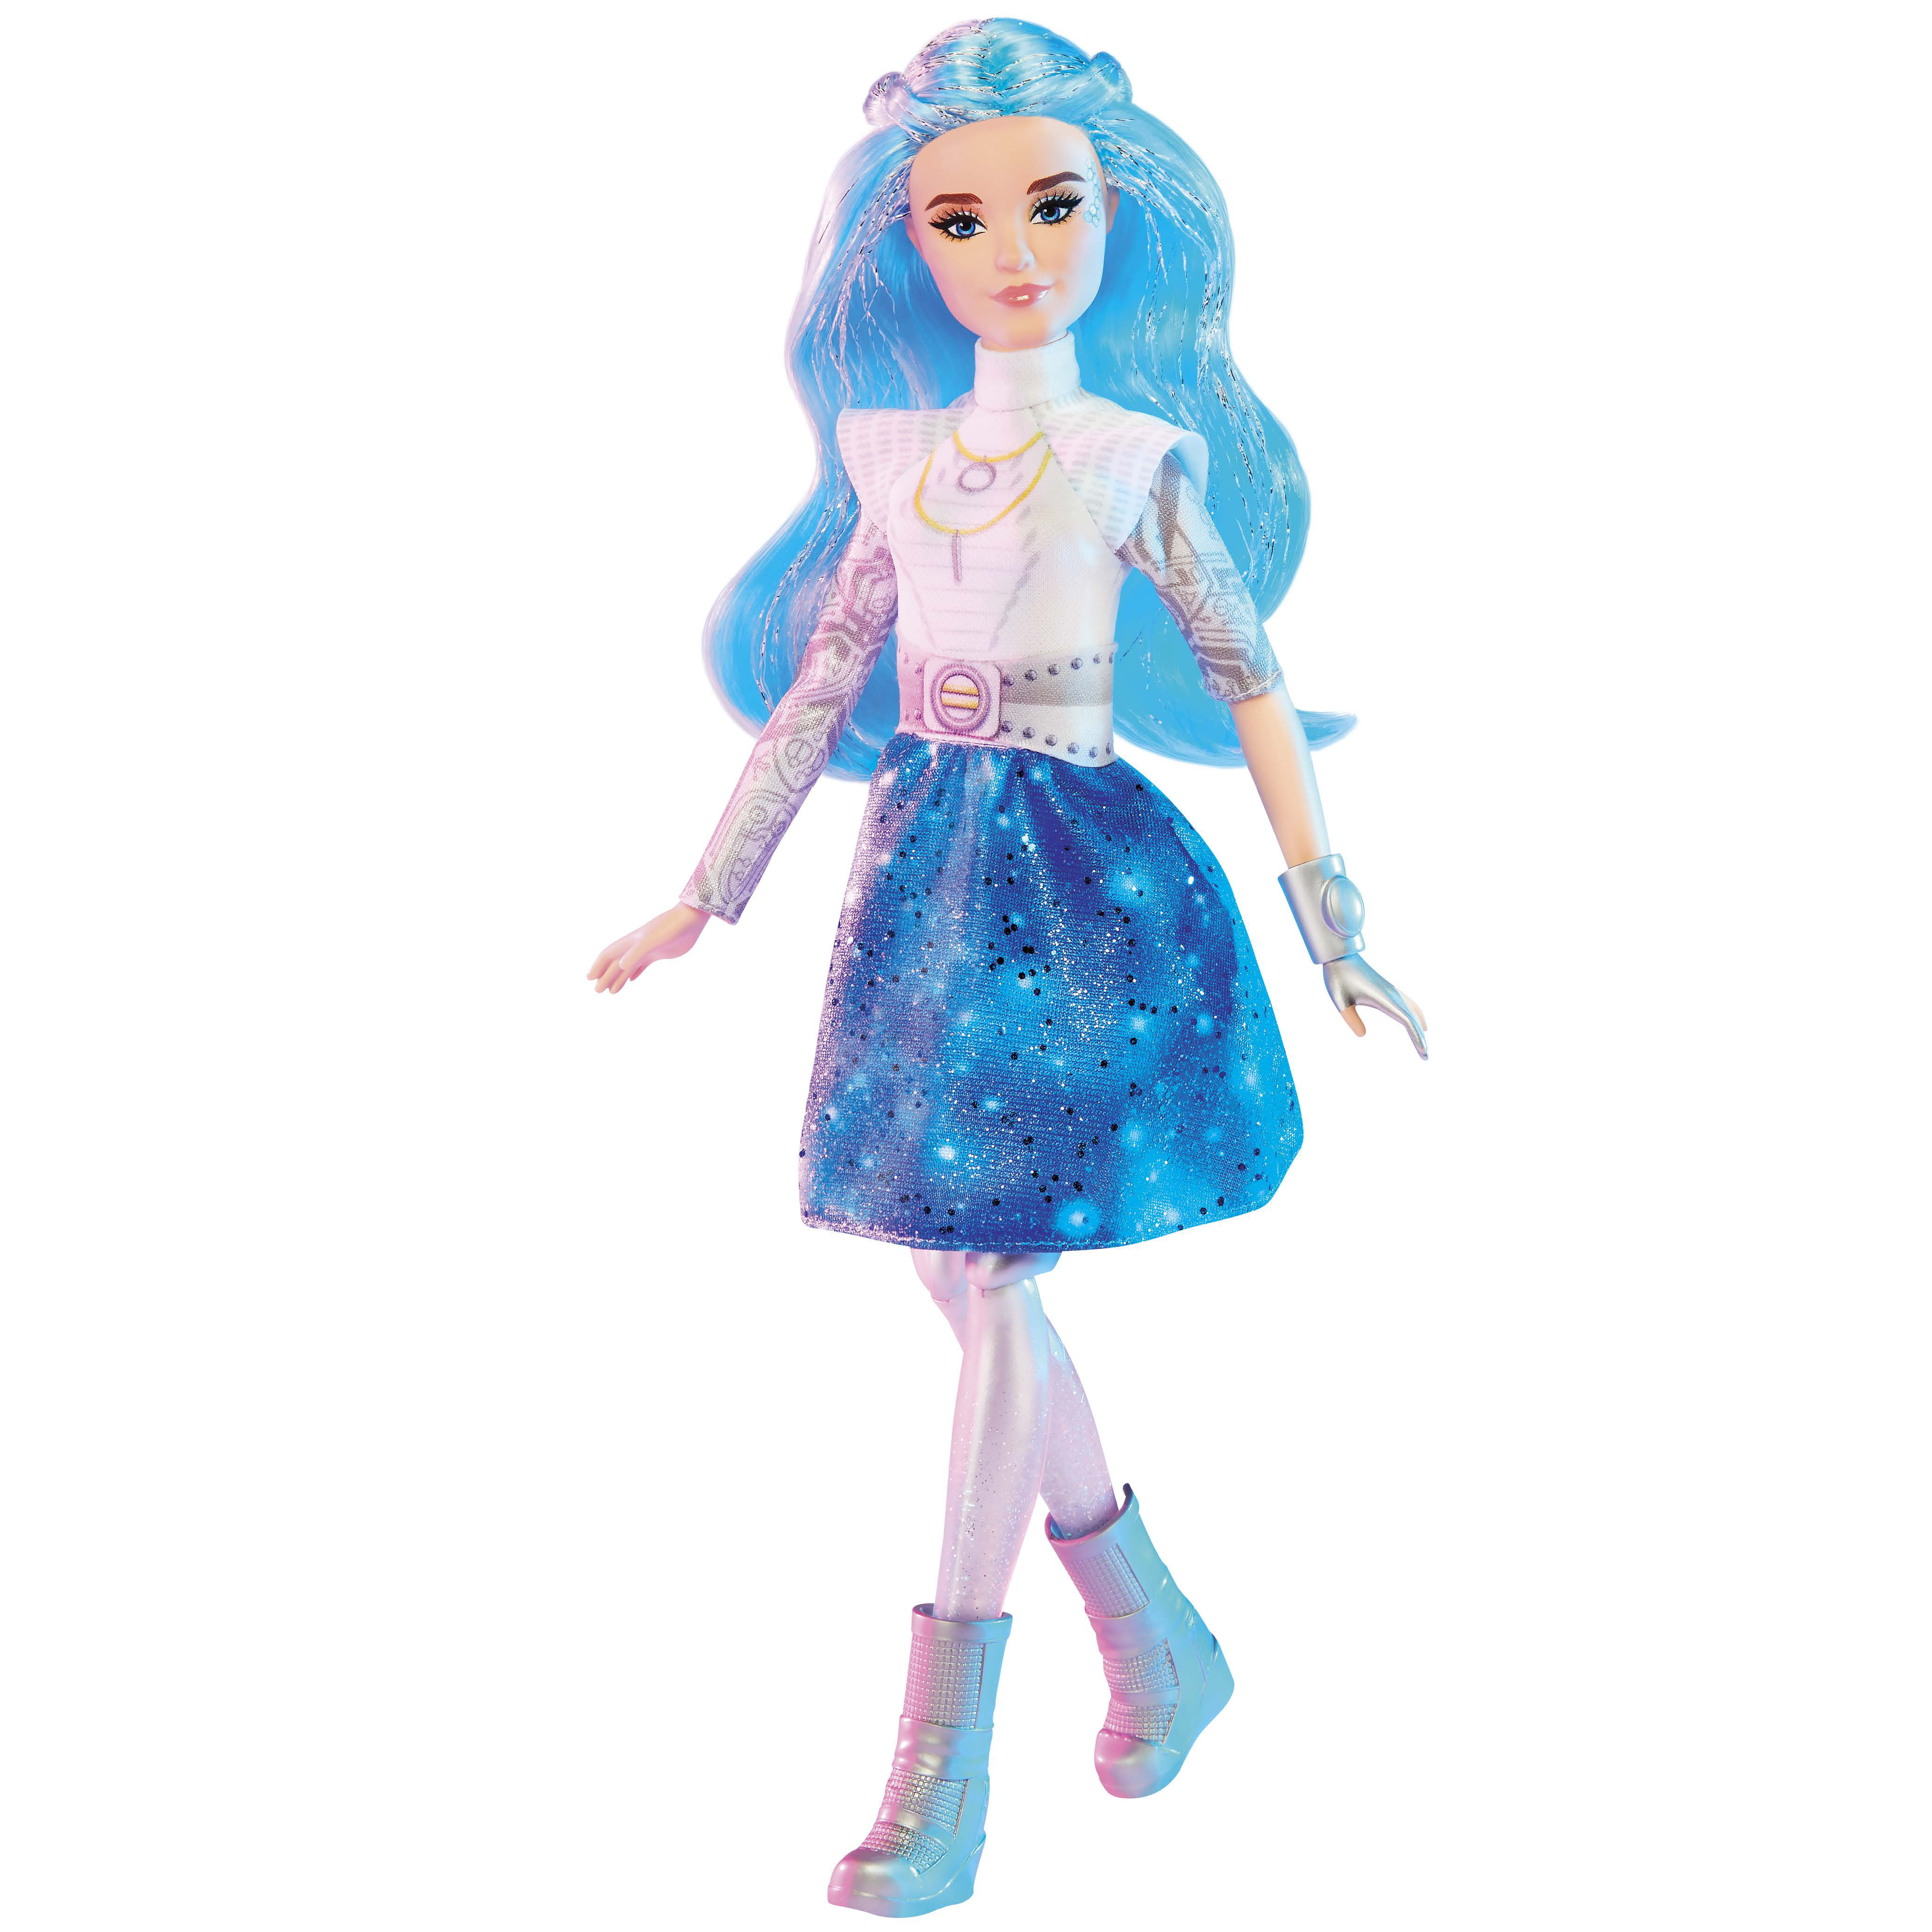 Disney Zombies 3 Singing Addison 12-Inch Doll [Lights & Sounds]